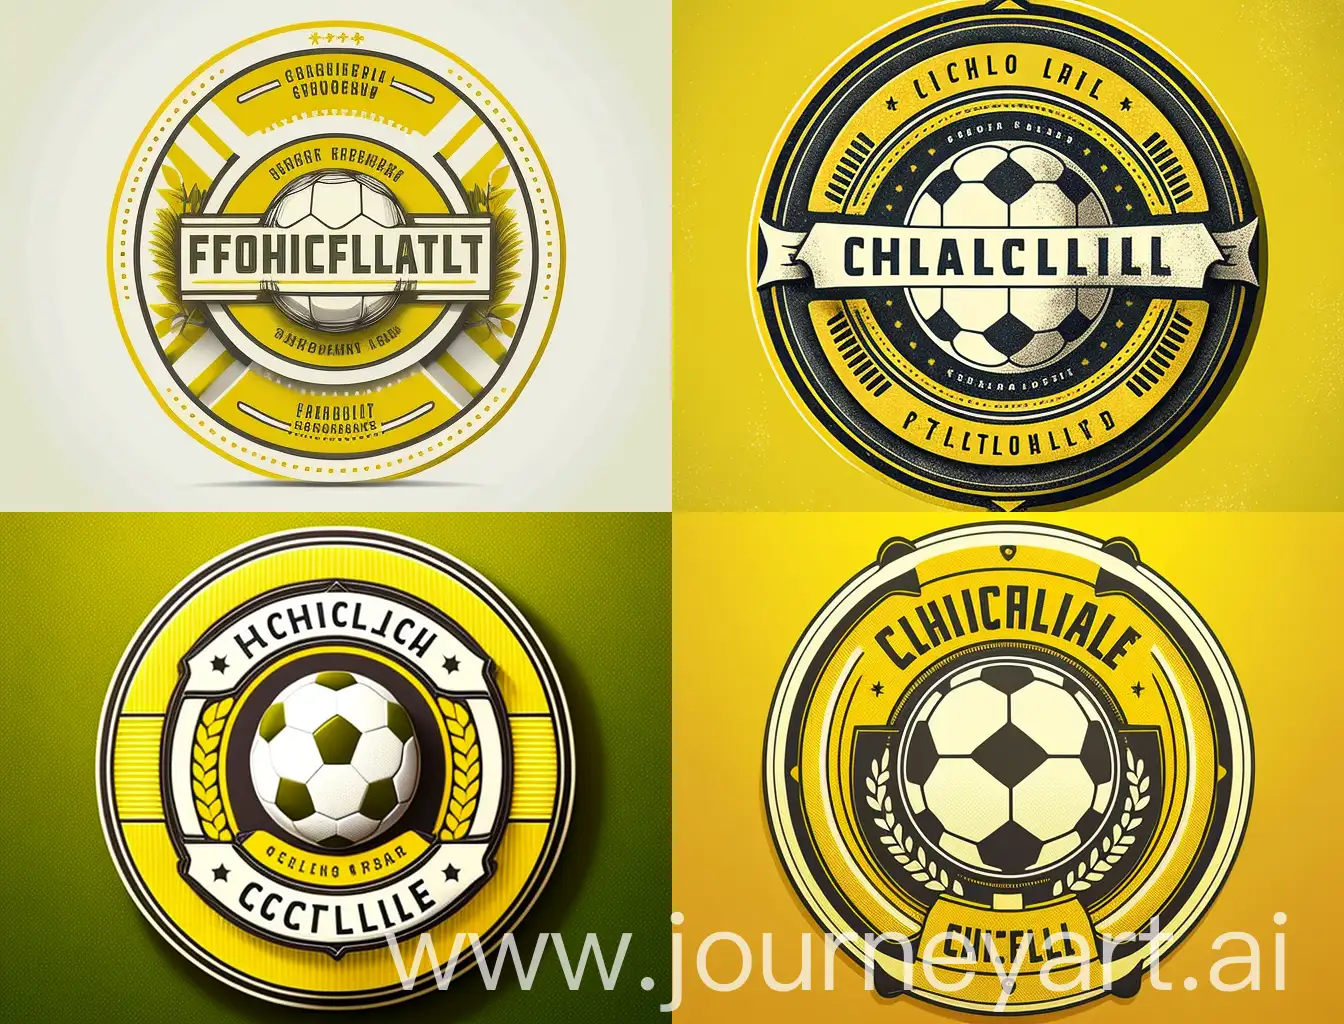 Circular-Football-Badge-with-Yellow-and-White-Colors